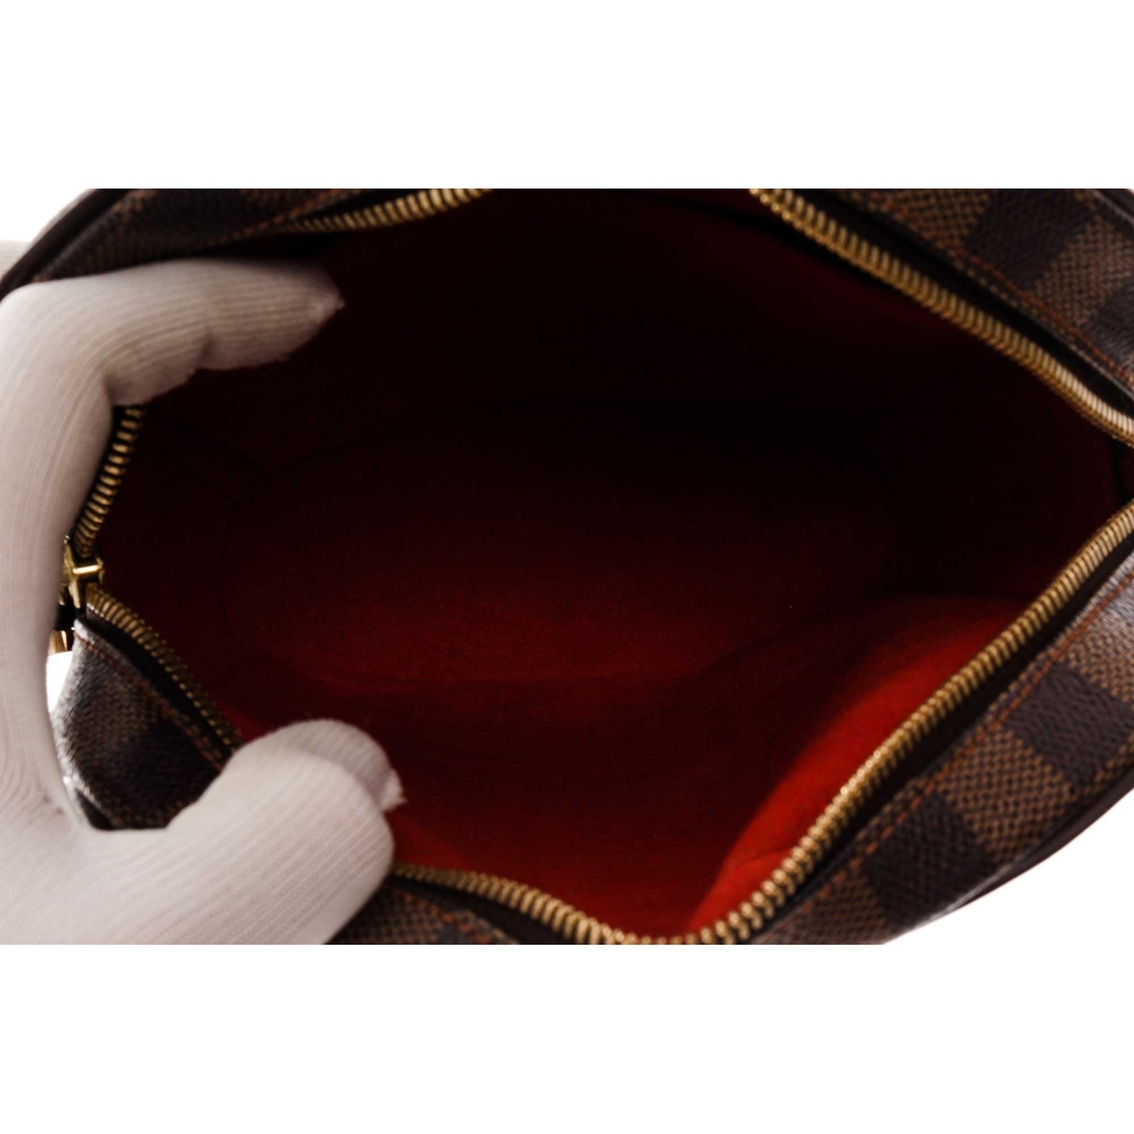 7 things that fits and Visual review of Louis Vuitton Ipanema PM